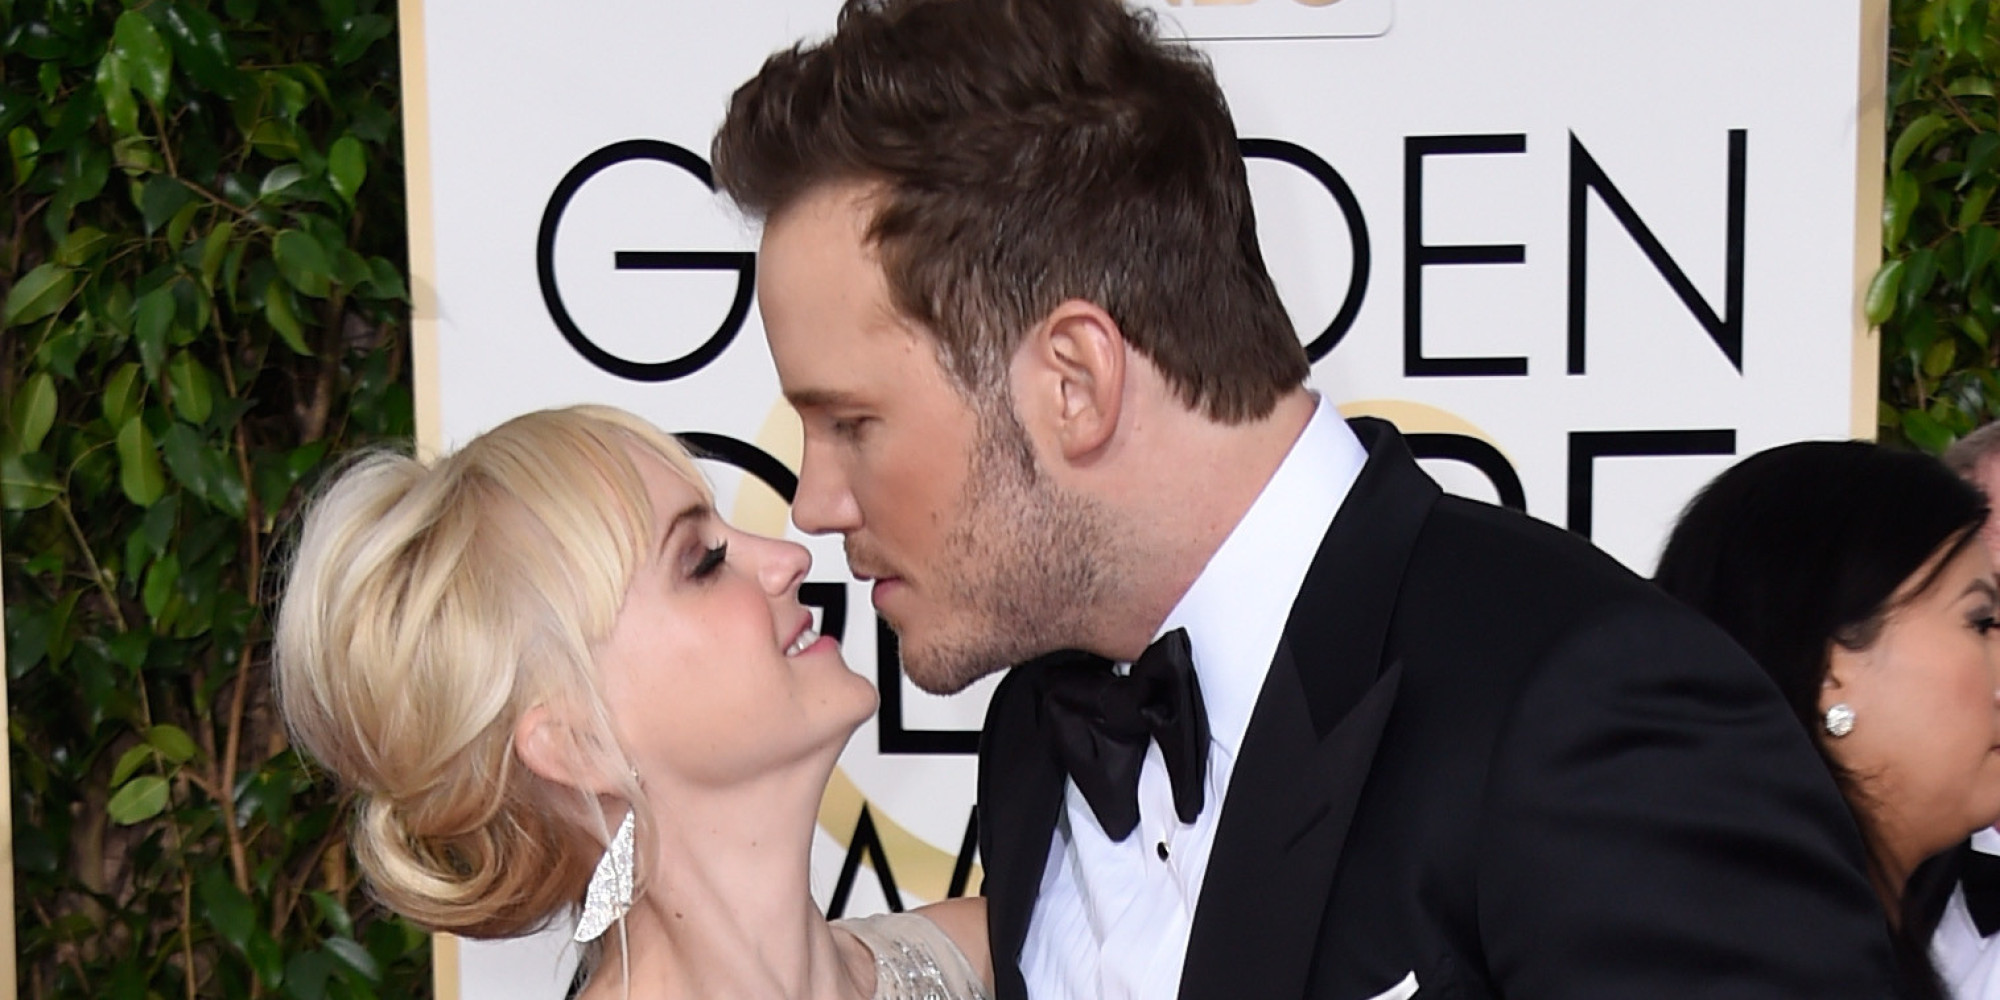 BEVERLY HILLS, CA - JANUARY 11: Actors Anna Faris and Chris Pratt attend the 72nd Annual Golden Globe Awards at The Beverly Hilton Hotel on January 11, 2015 in Beverly Hills, California. (Photo by Frazer Harrison/Getty Images)